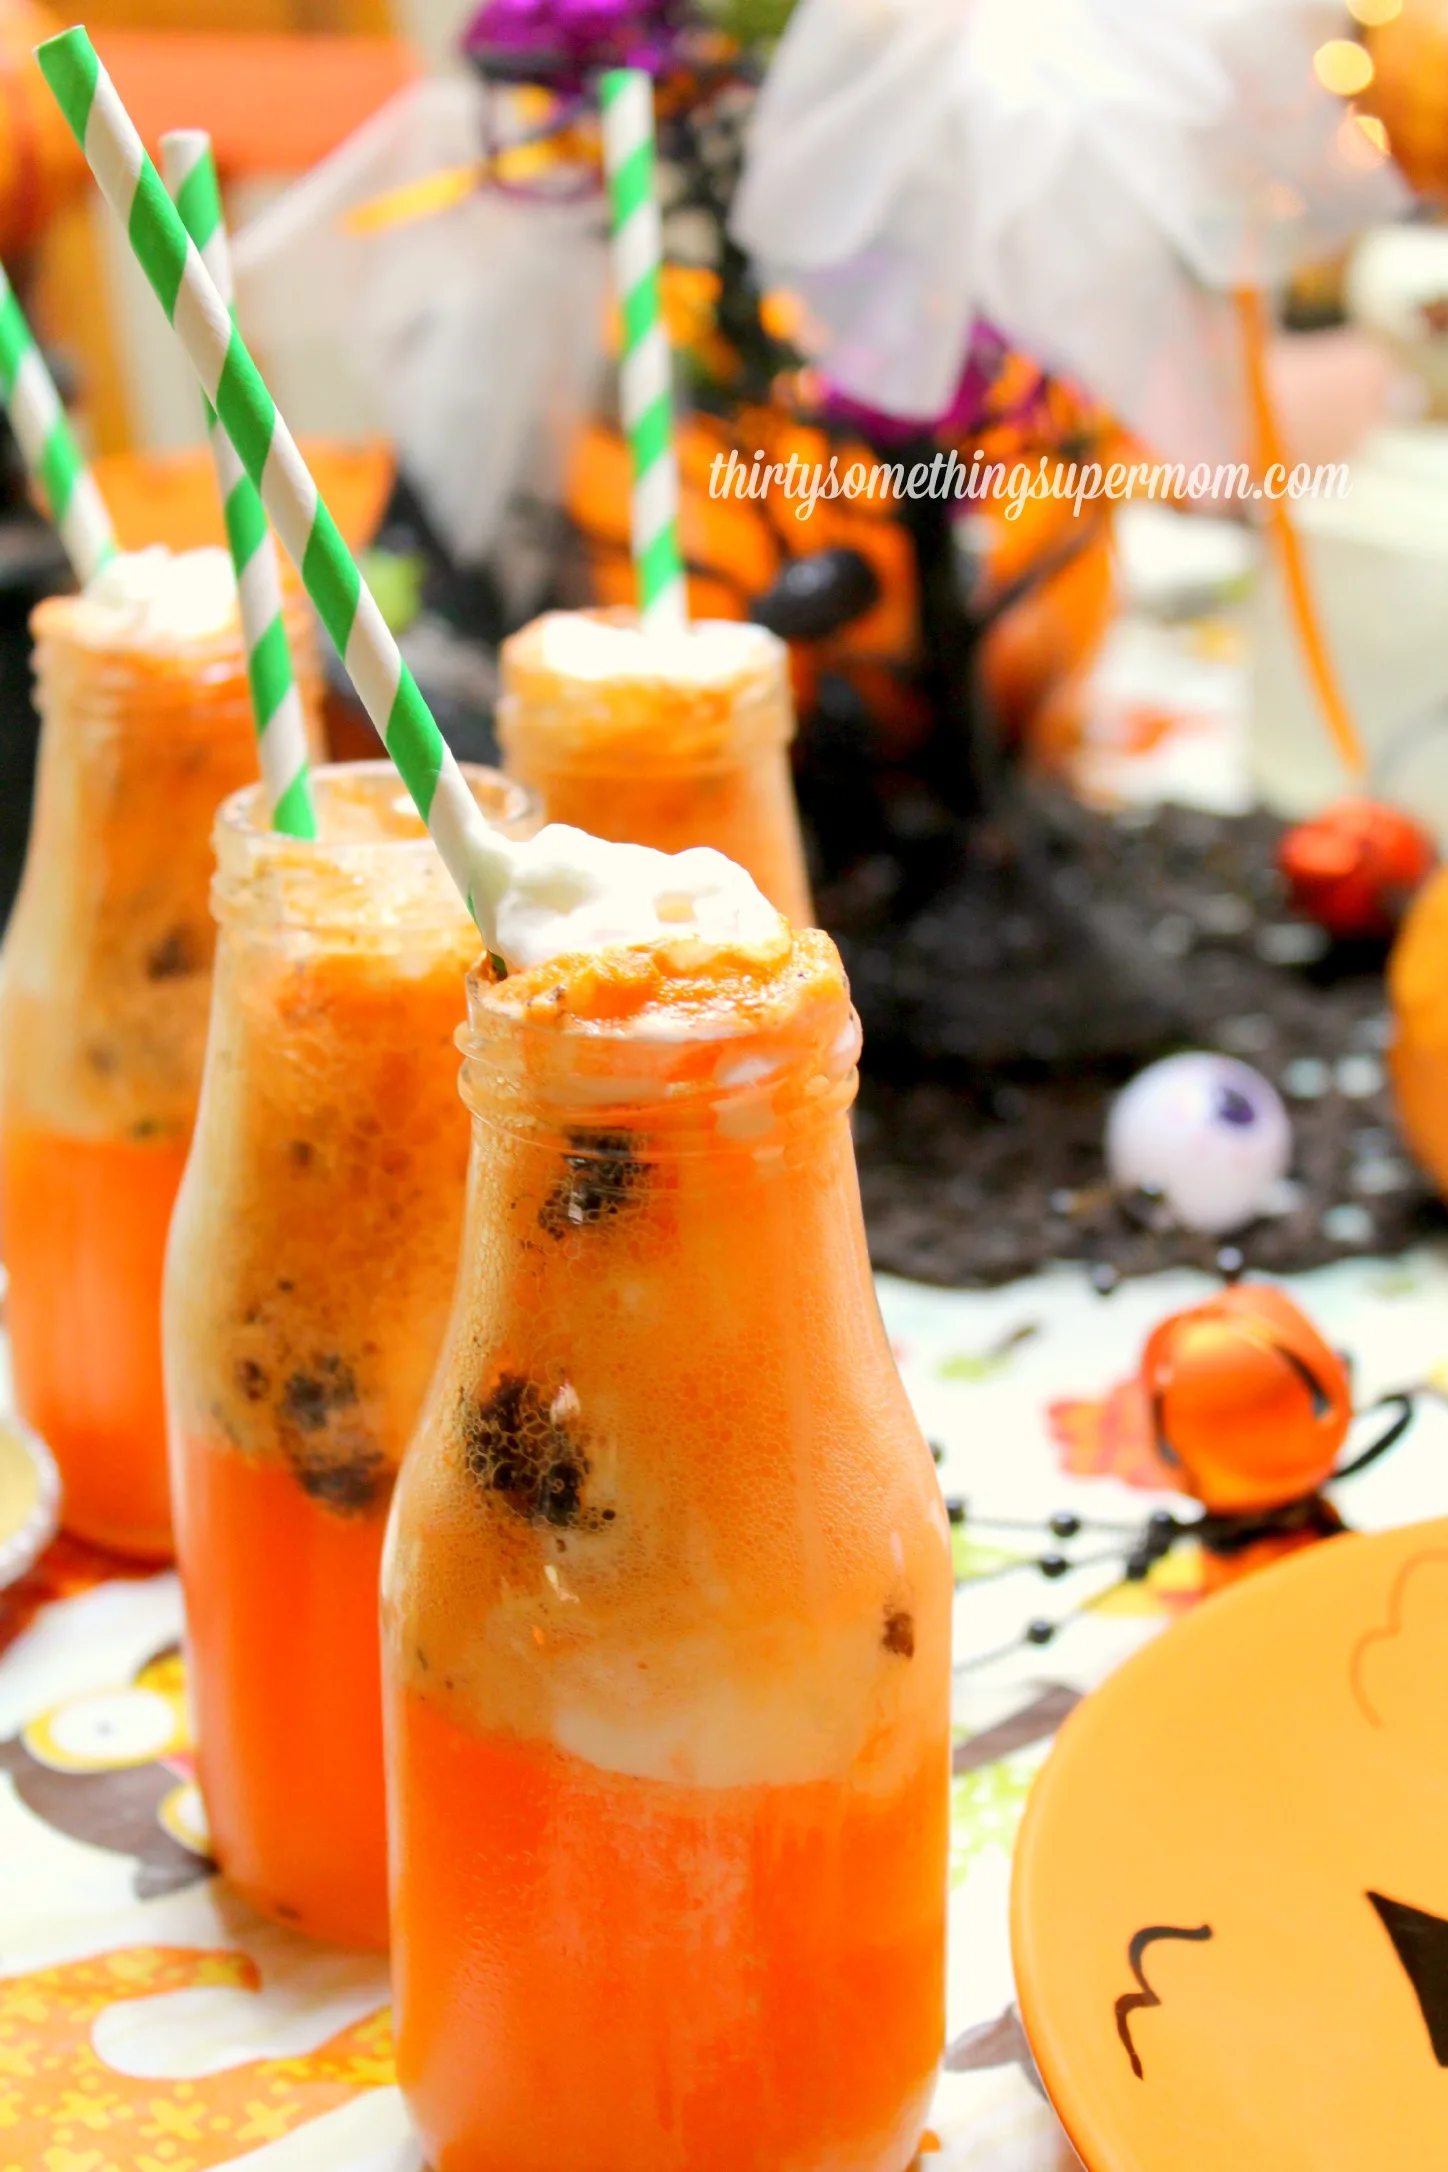 How to Make an Orange Creamsicle Drink for Halloween